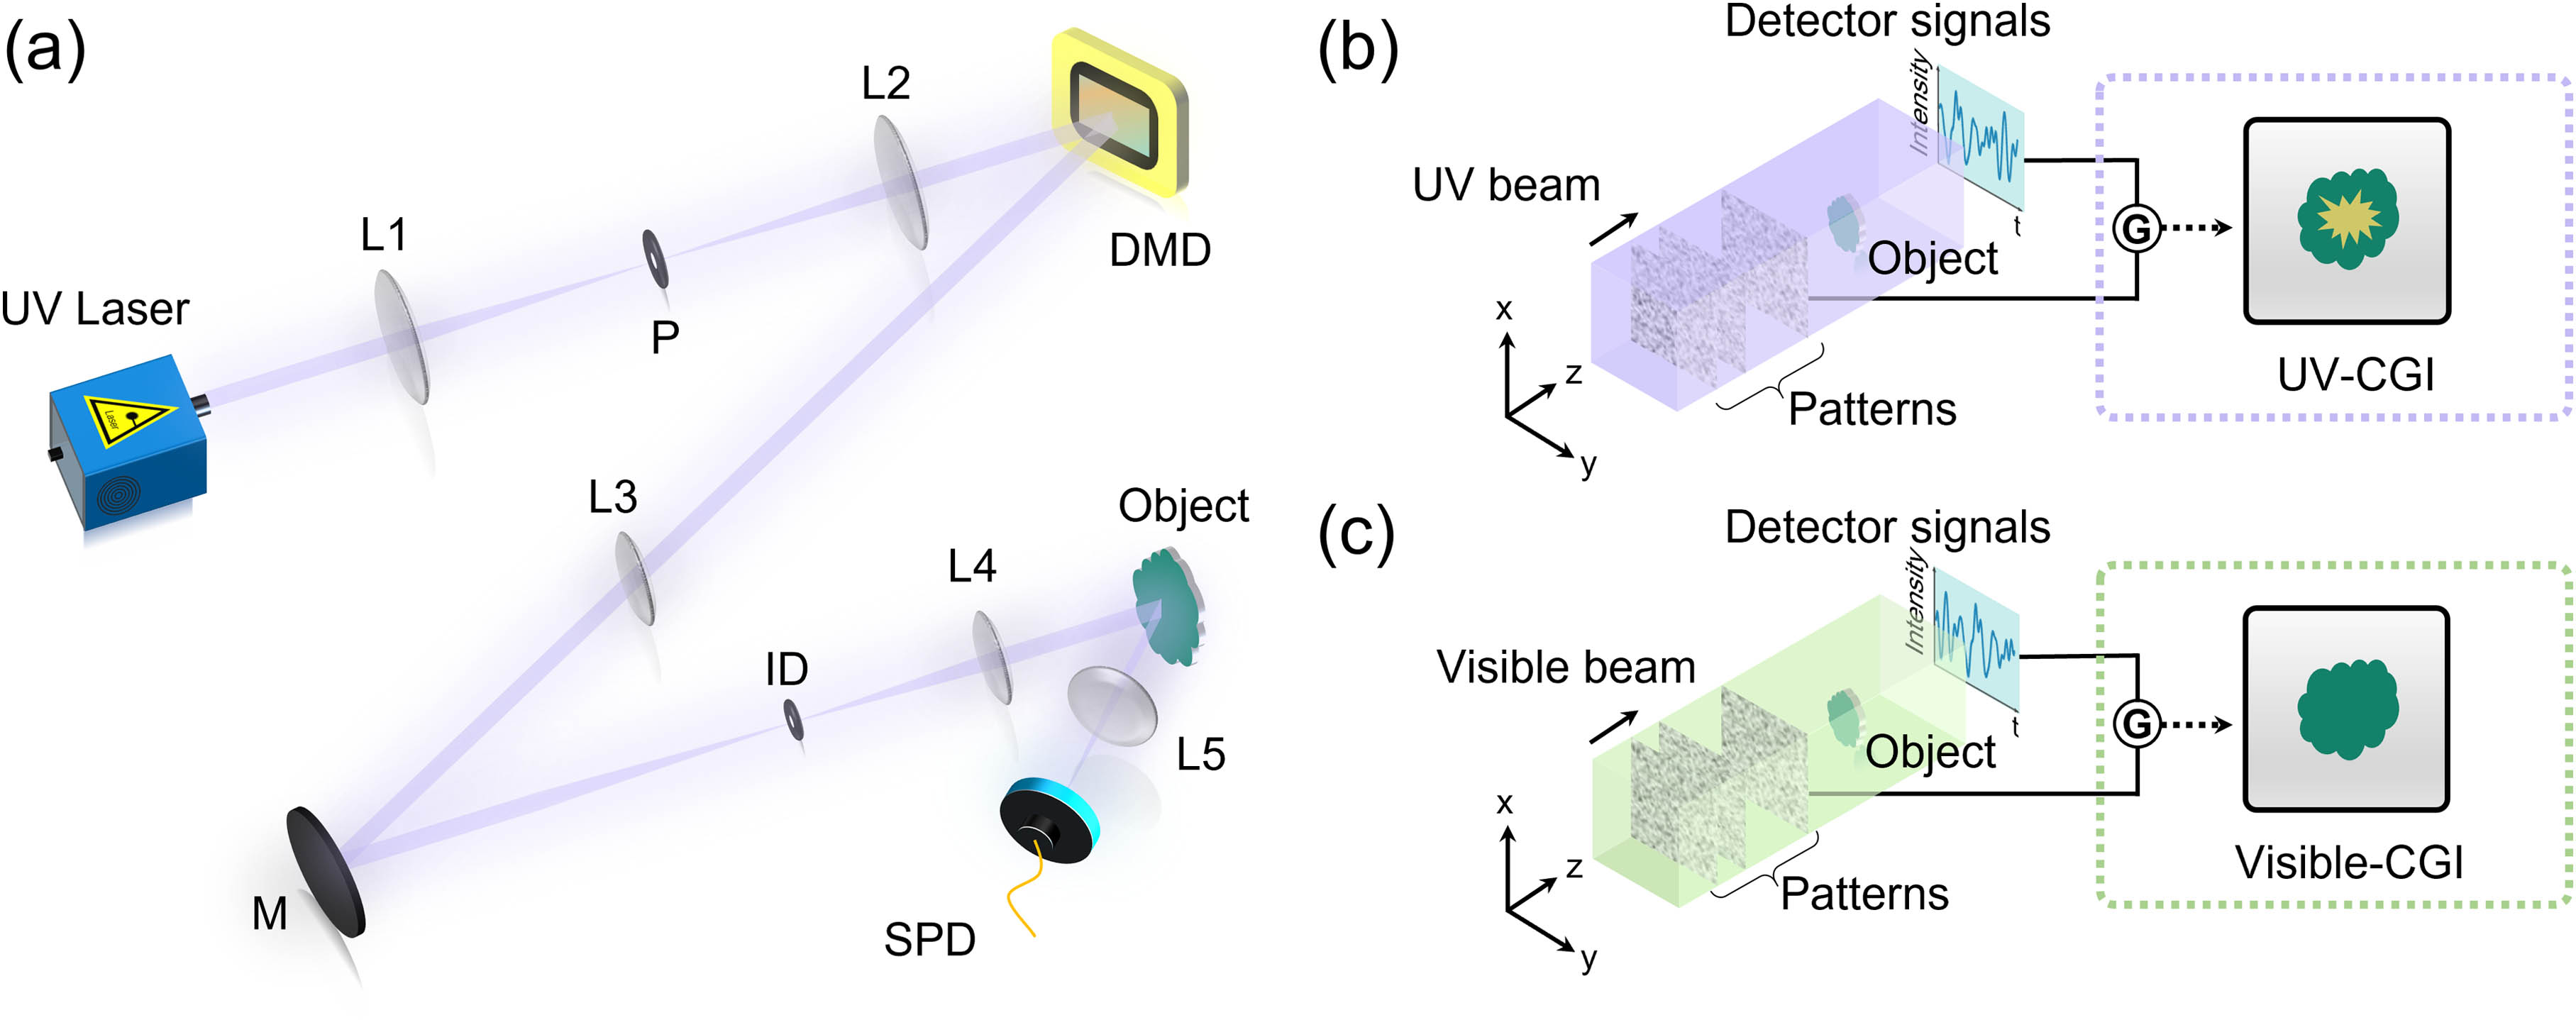 Schematics of ultraviolet computational ghost imaging (UV-CGI). (a) Experimental setup. L1–L5, lenses; P, pinhole; DMD, digital micromirror device; M, mirror; ID, iris diaphragm; SPD, single-pixel detector. (b) UV-sensitive image of the object; the yellow part within the image represents the area that contains UV-sensitive samples. (c) As a comparison, traditional visible CGI cannot reveal such a UV image.